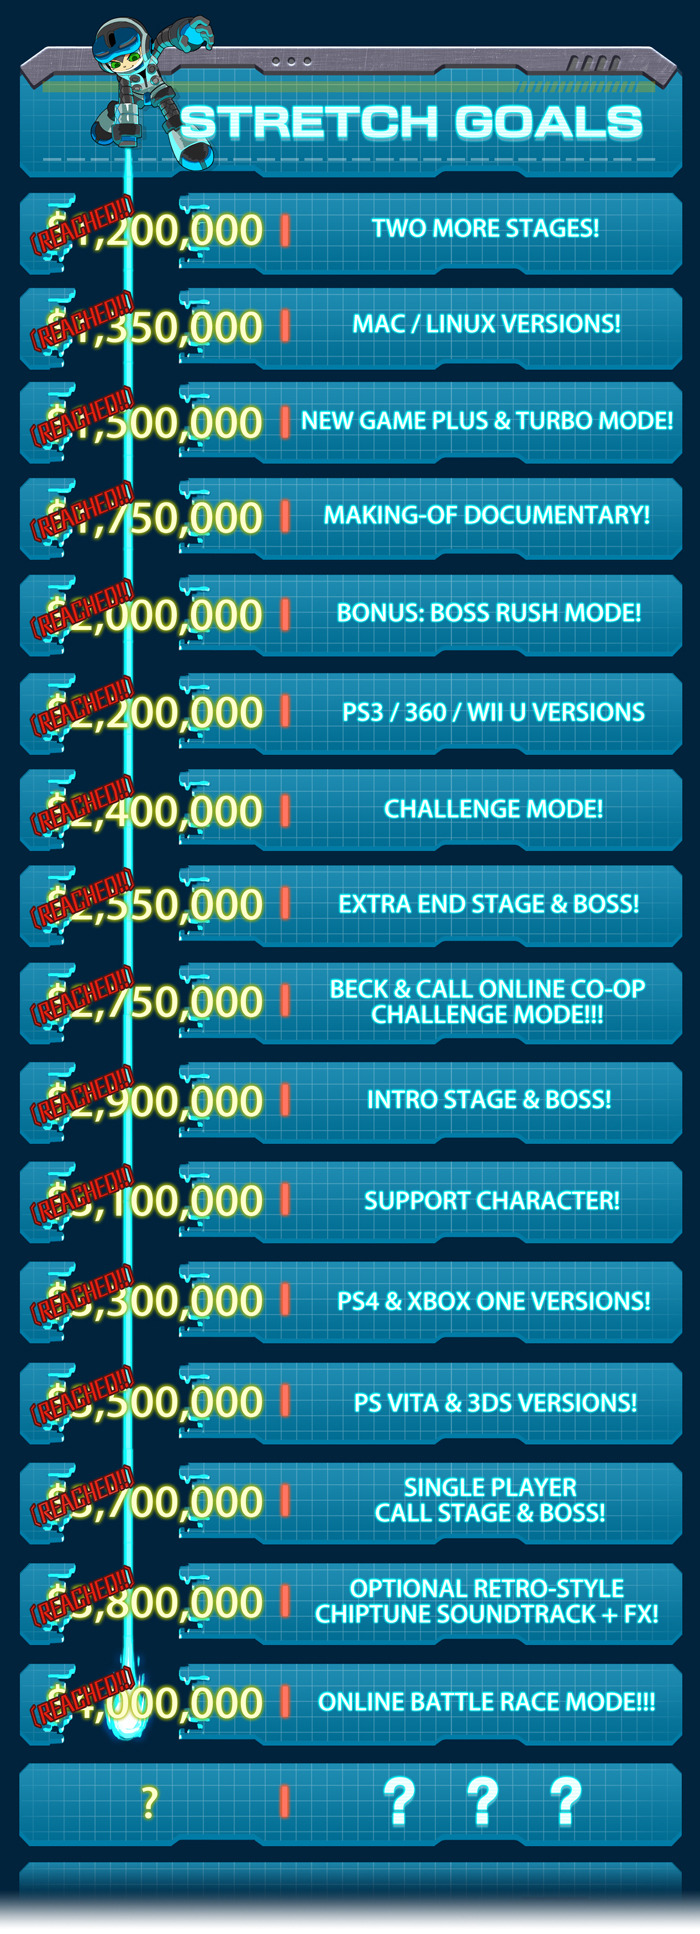 mighty no 9 stretch goals finale